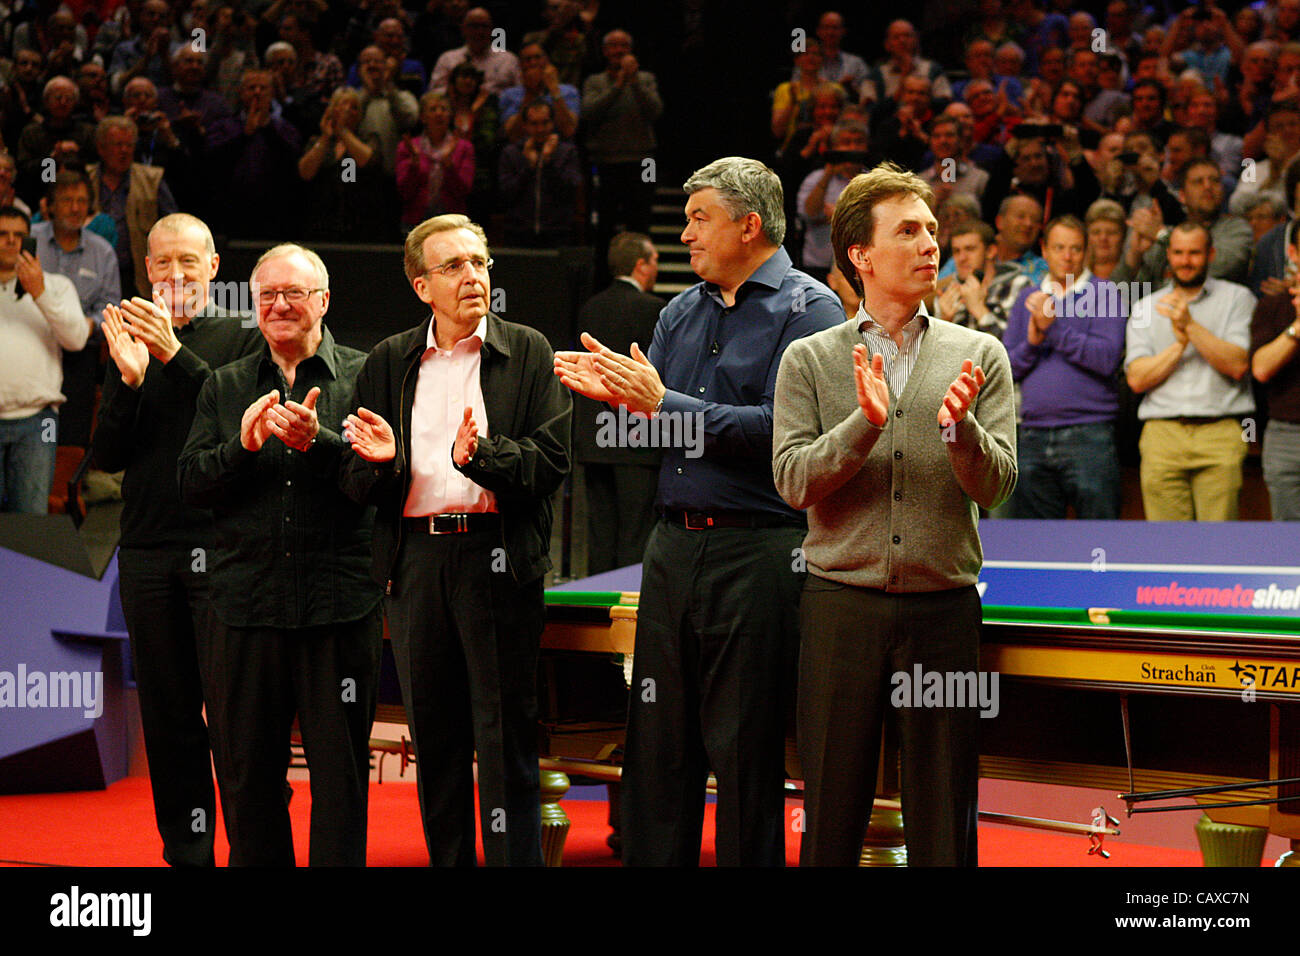 02.05.2012. Crucible, Sheffield, Yorkshire, England.  Steve Davis (left to Right), Dennis Taylor, Terry Griffiths, John Parrott, and Ken Doherty paid tribute to seven-time world champion Stephen Hendry, who announced his retirement from the professional game after his quarter-final defeat by Stephen Stock Photo